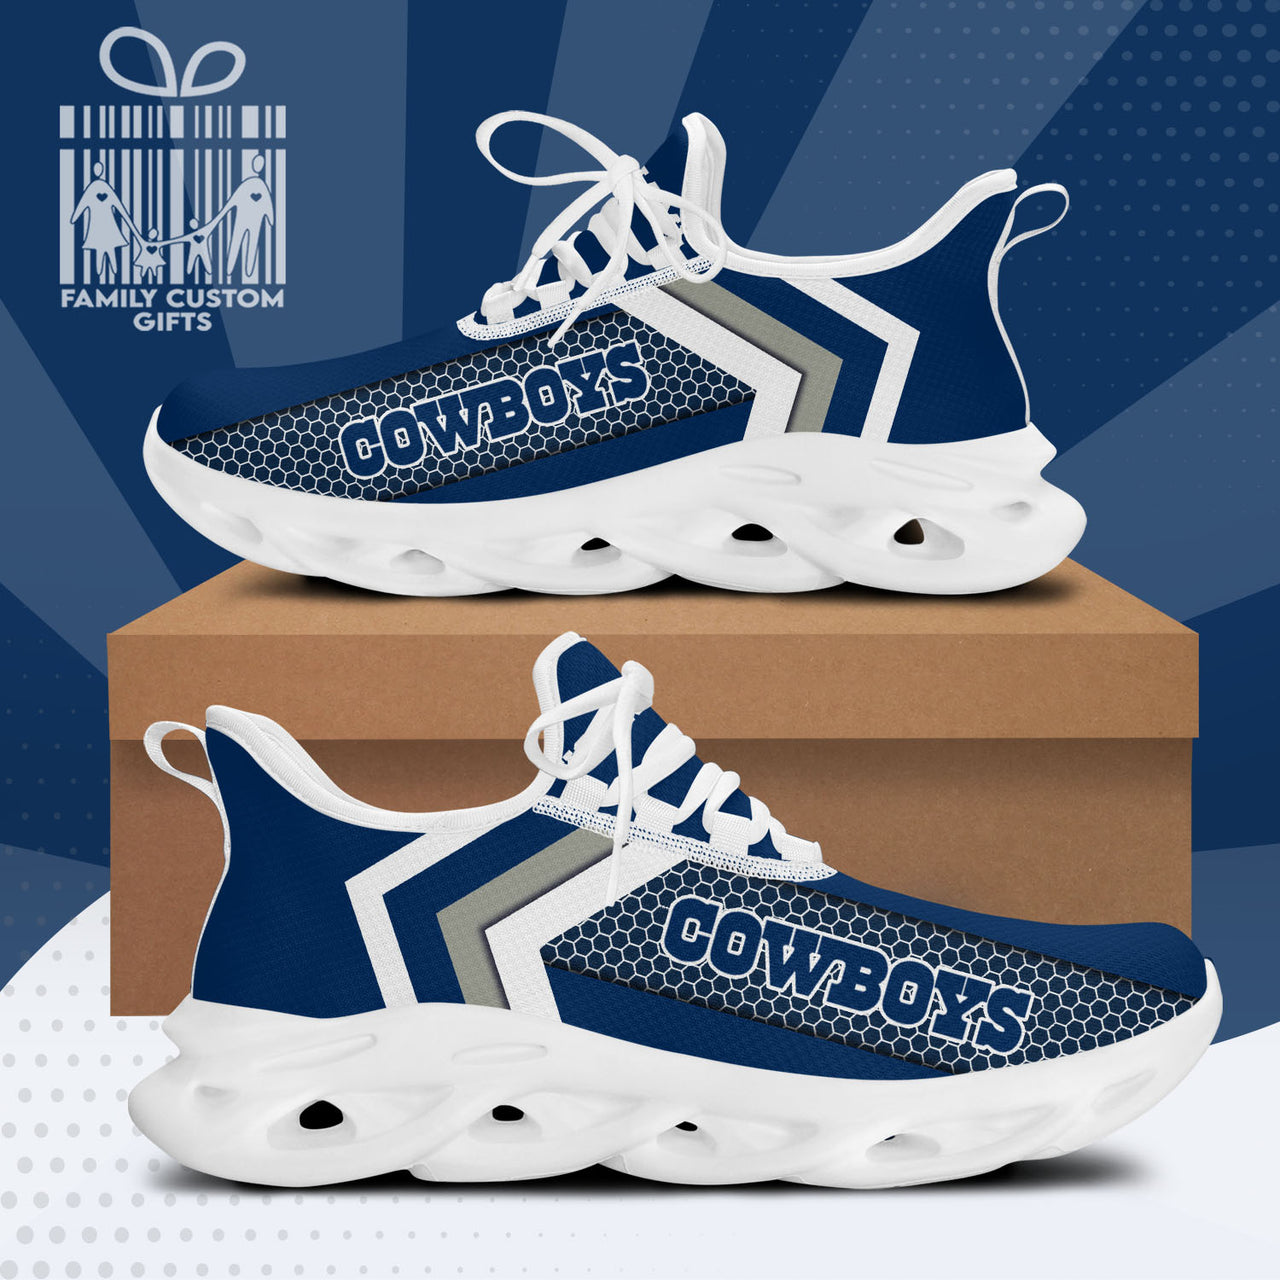 Dallas Football Cowboys Personalized Max Soul Sneakers Running Sport Shoes for Men Women